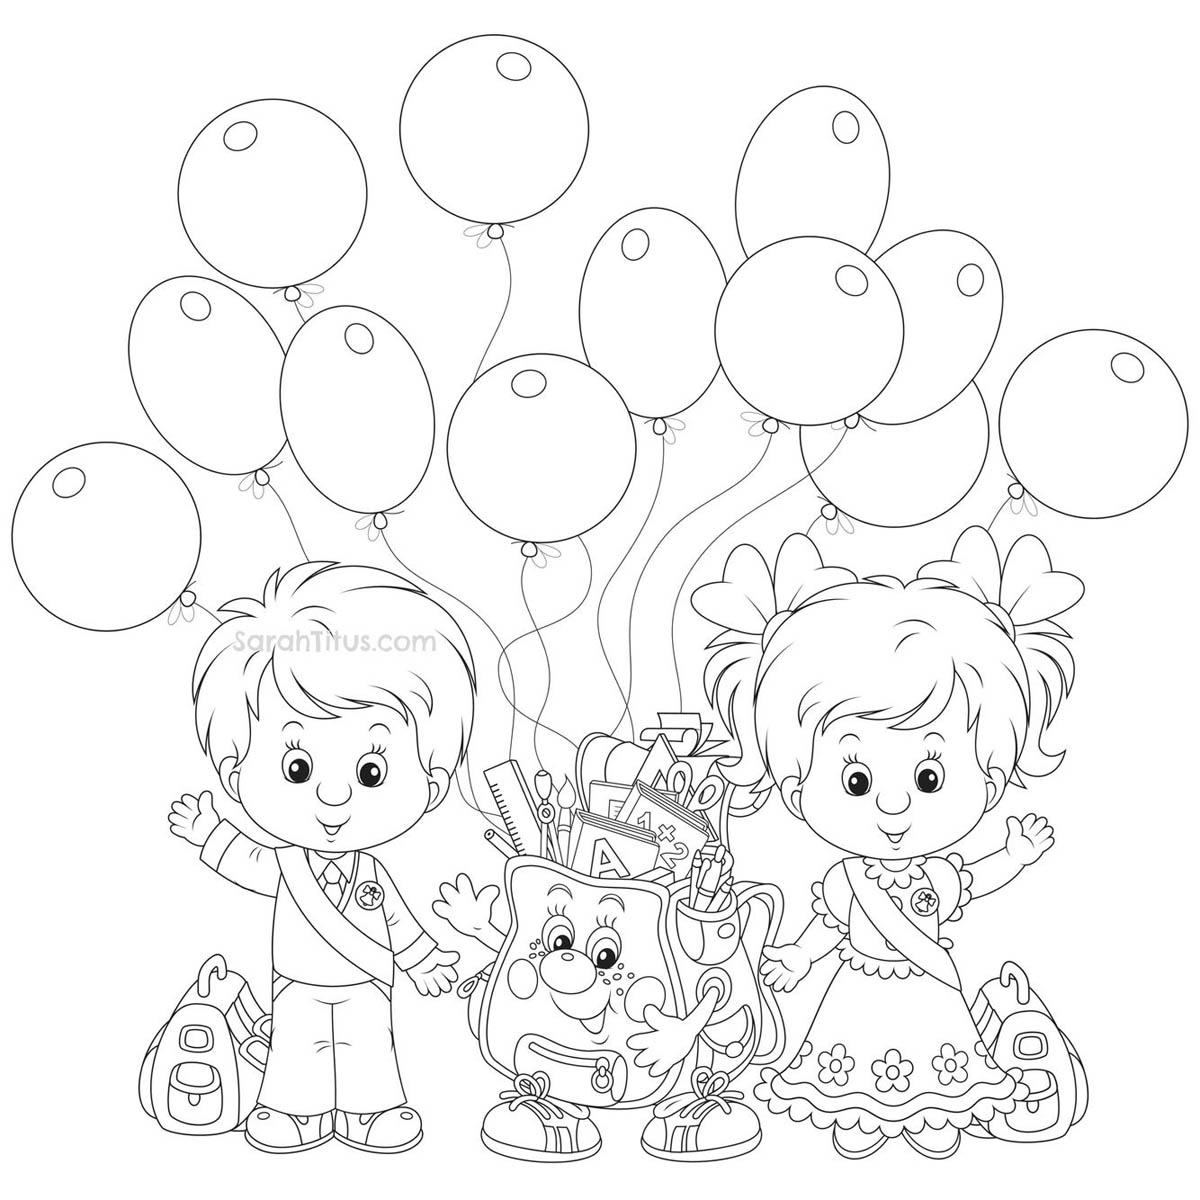 Free Celebrate End of School Year Coloring Pages printable